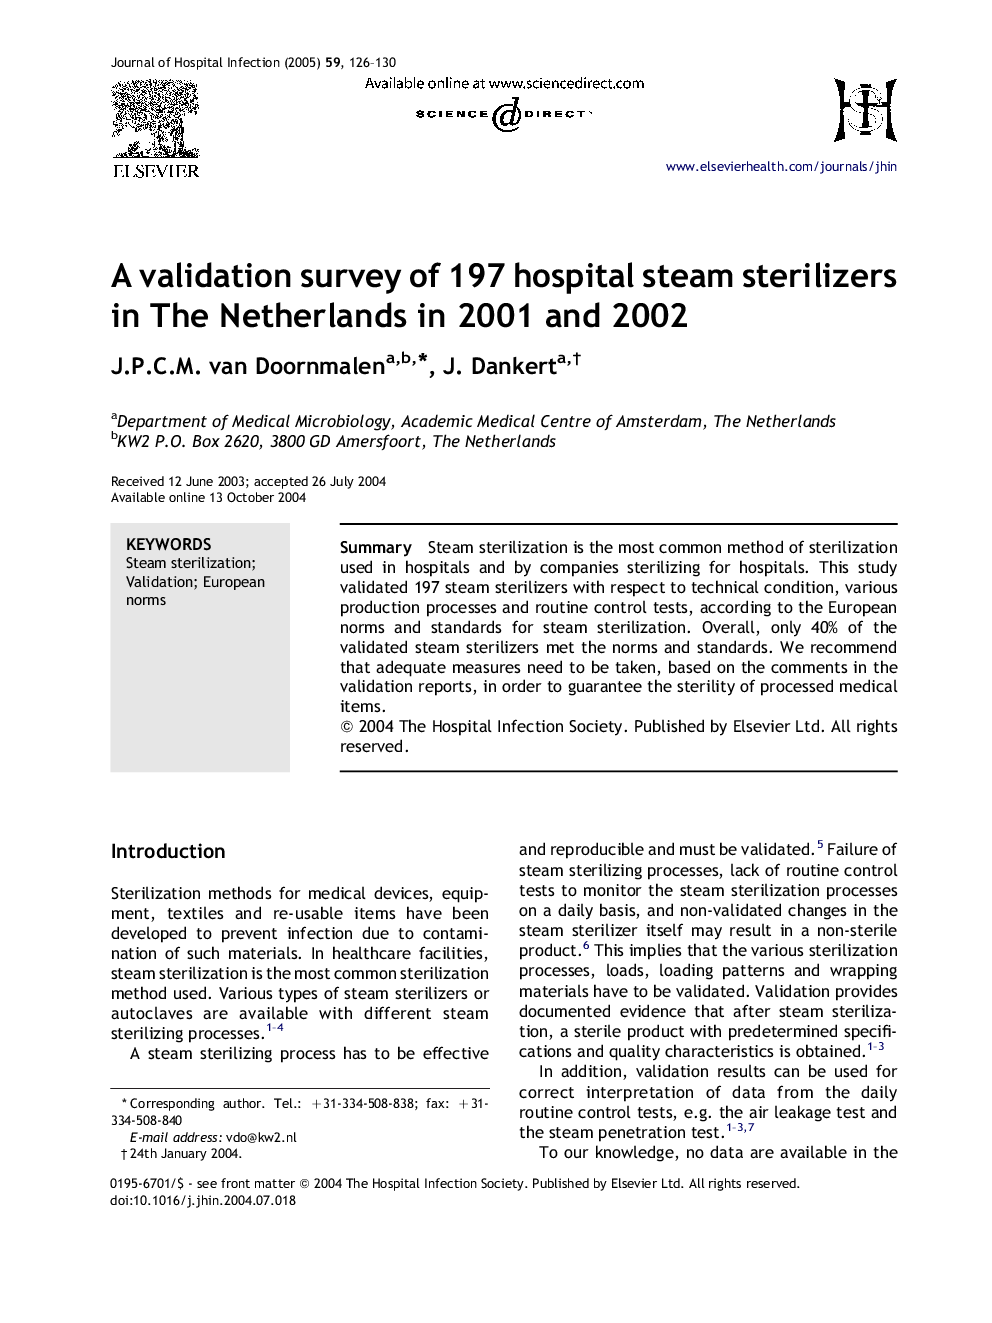 A validation survey of 197 hospital steam sterilizers in The Netherlands in 2001 and 2002